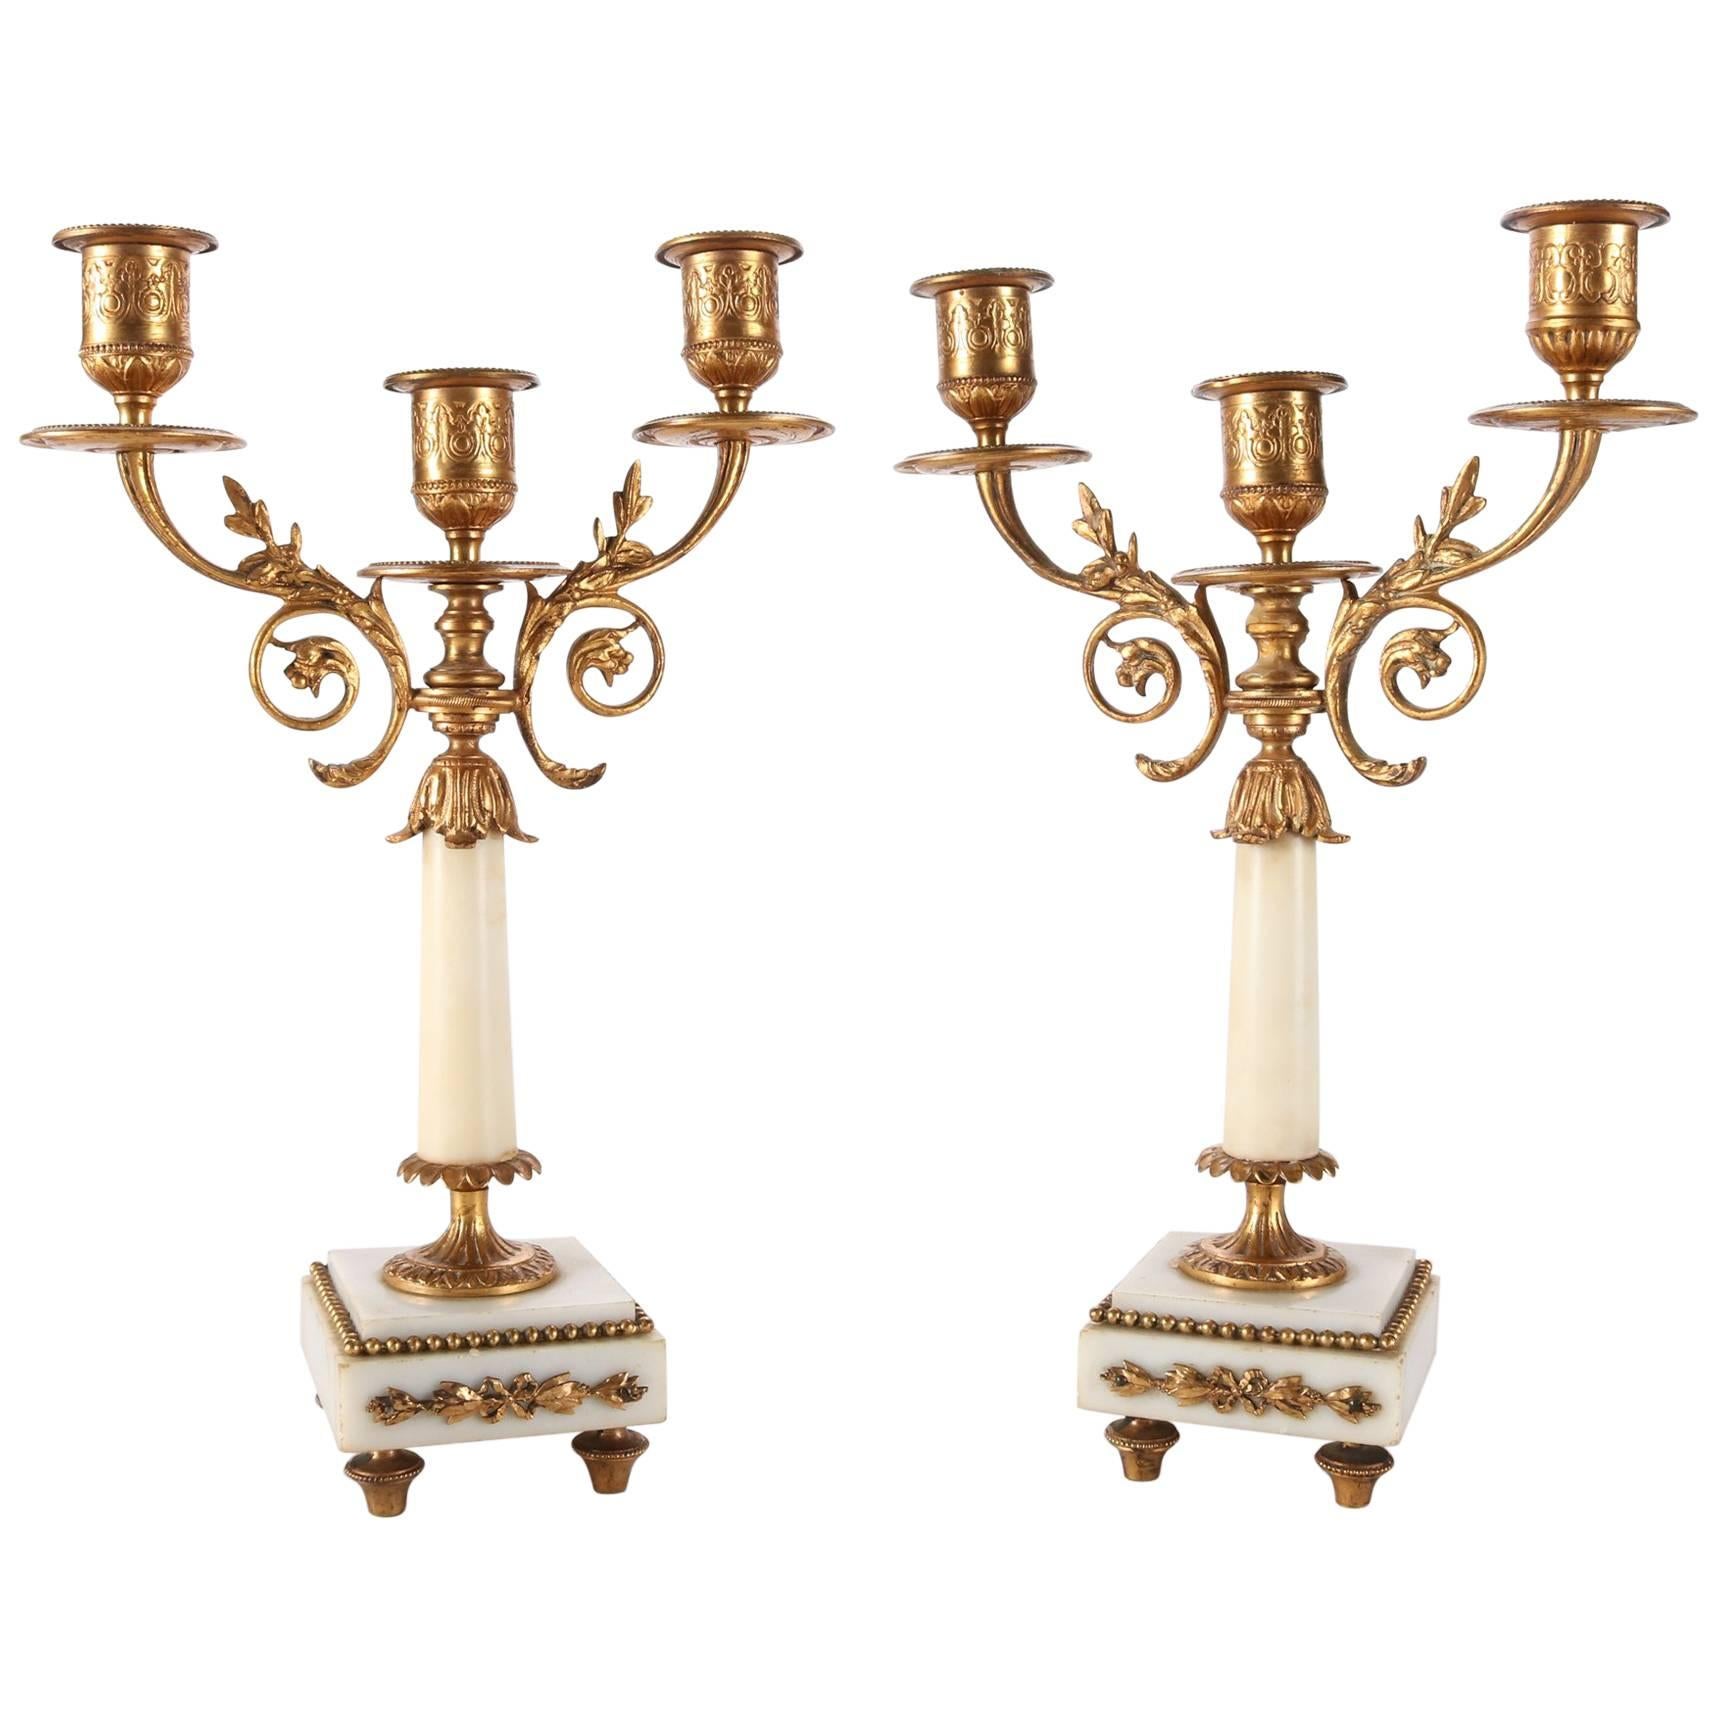 Pair of Antique French Classical Gilt Bronze and Marble Three-Light Candelabra